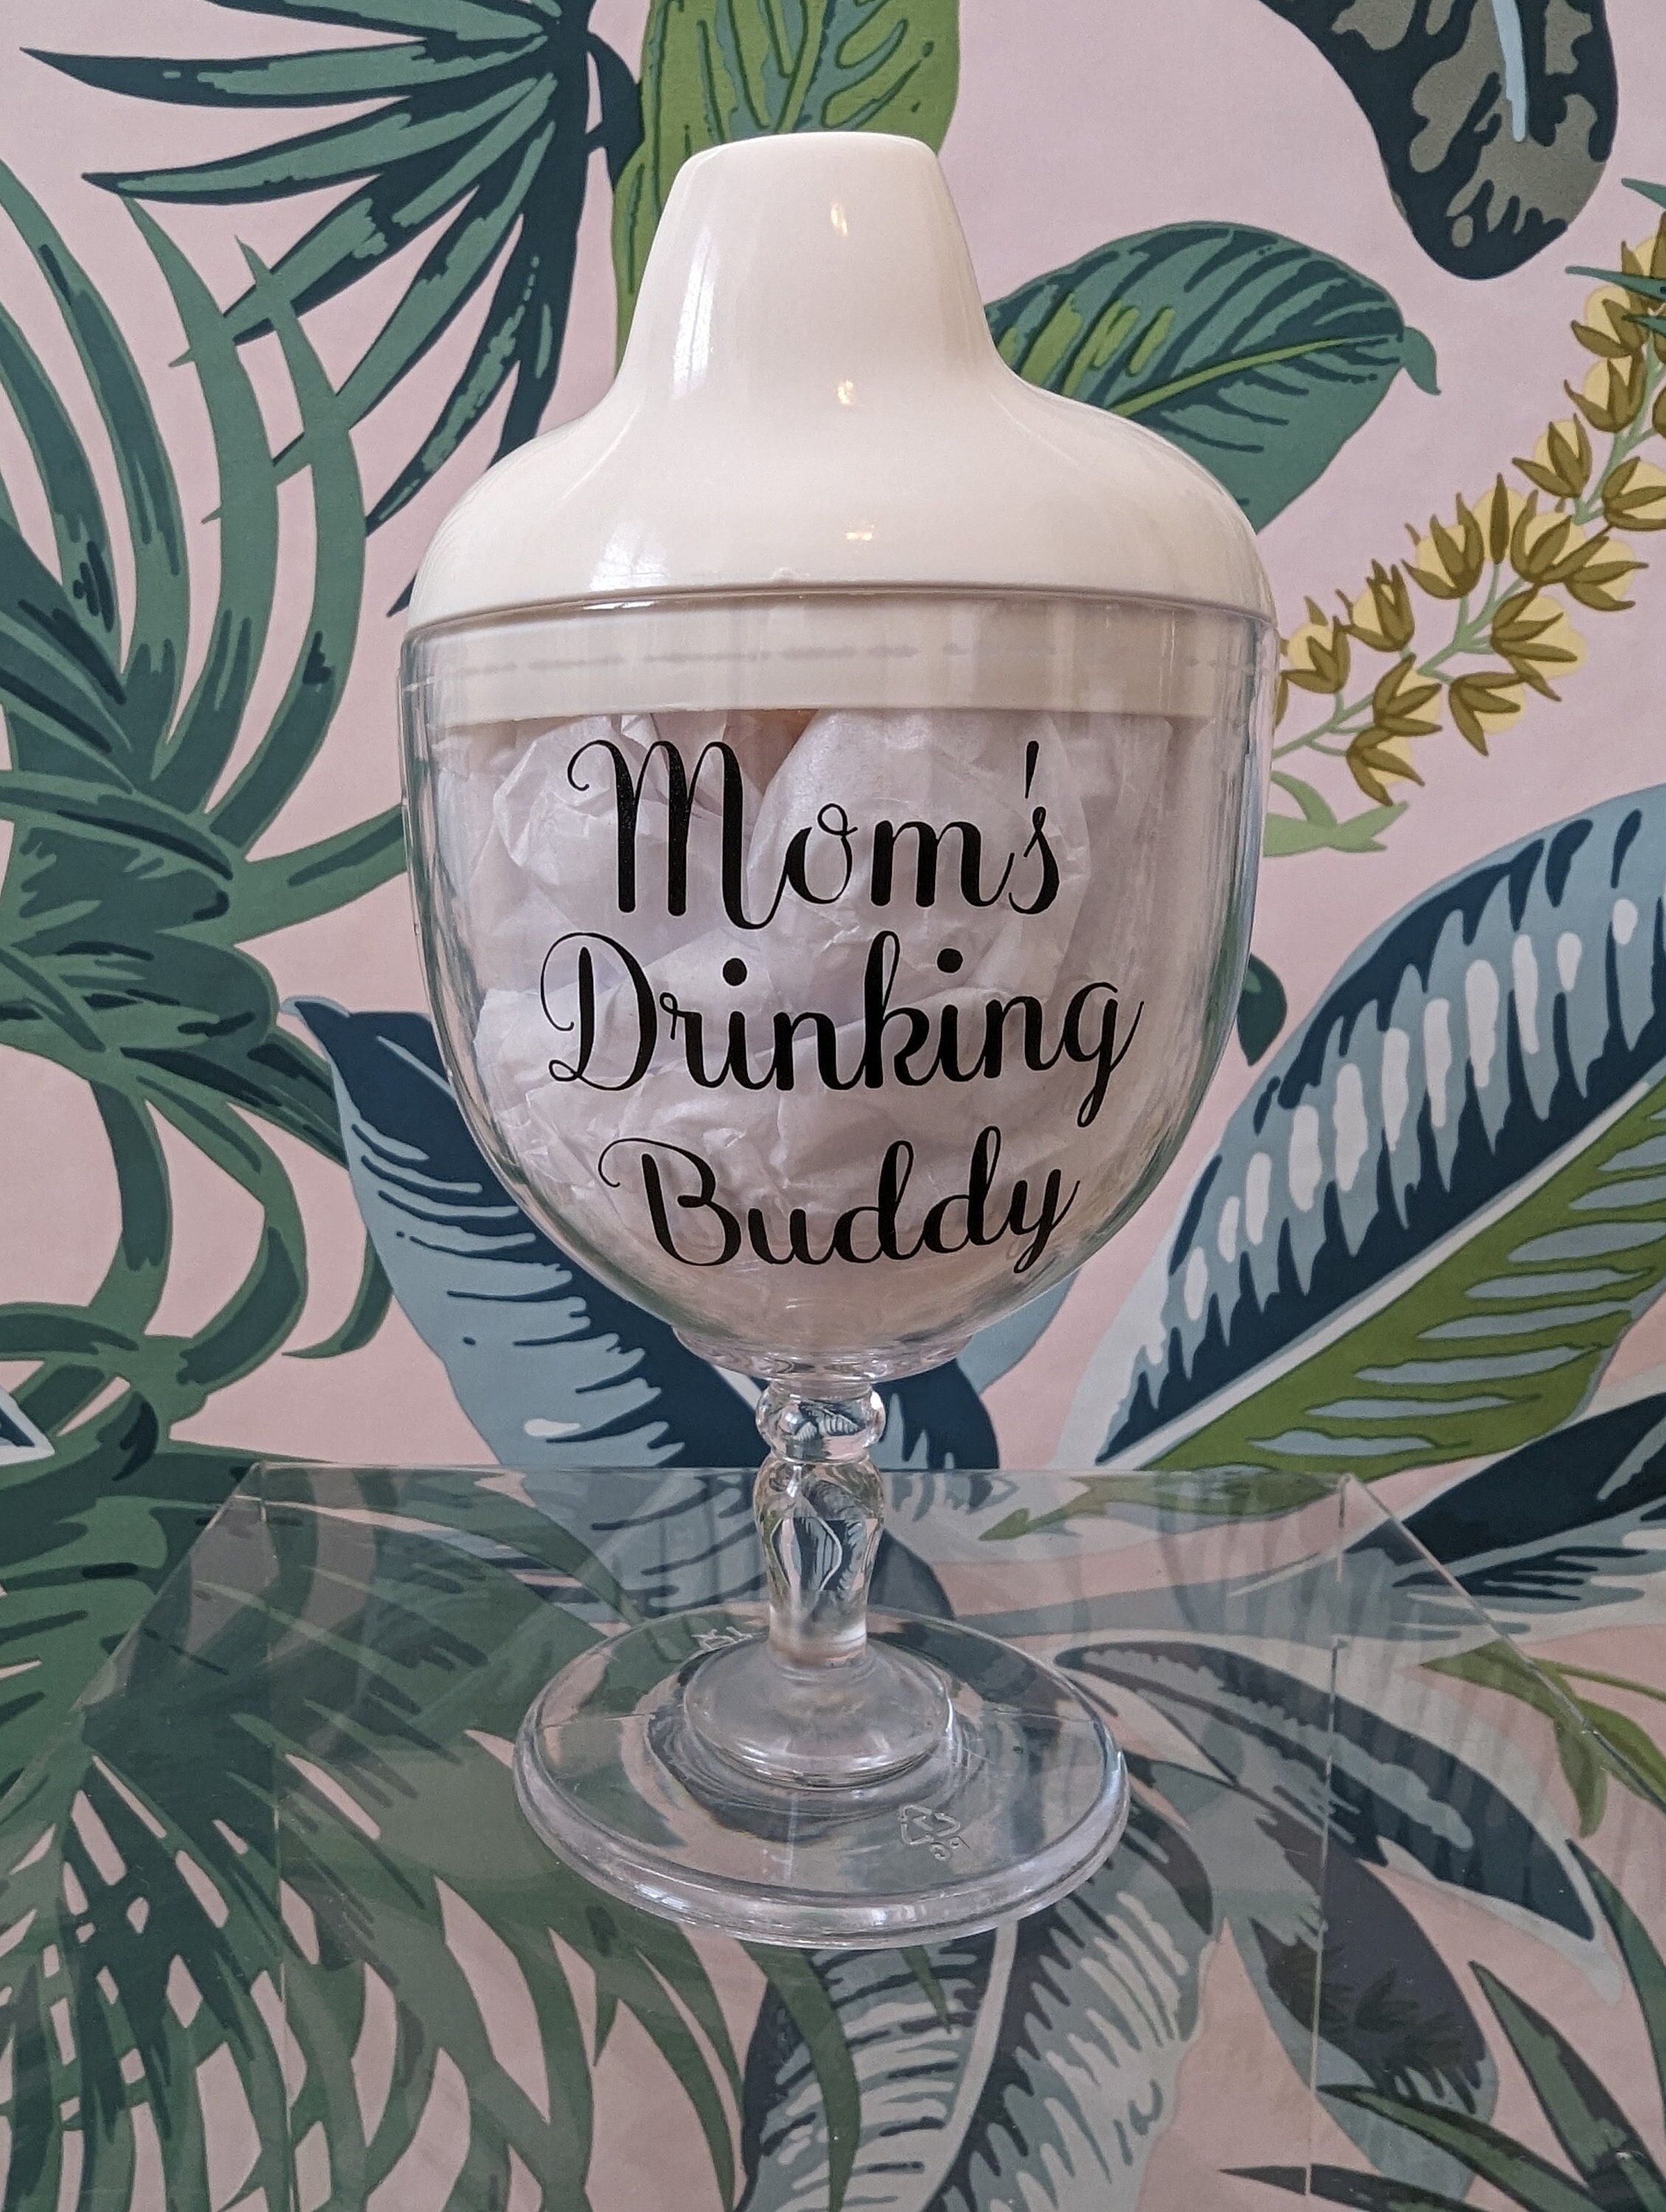 Daylily SIPSIP Wine Glass | The Wine Glass with a Straw | Mommy's Sippy Cup